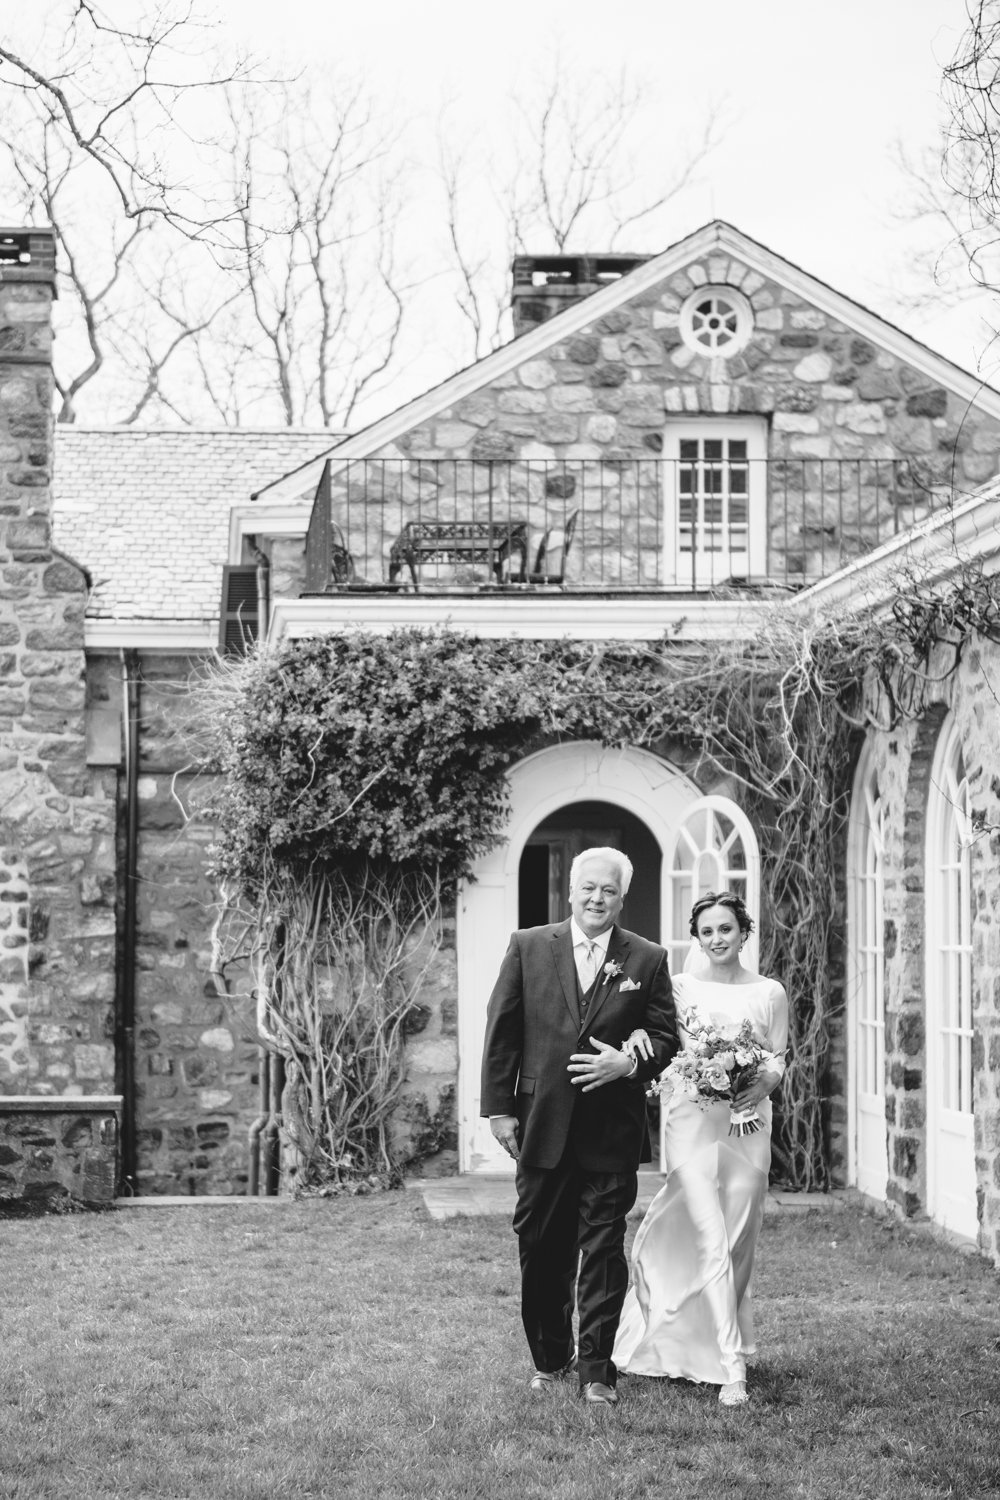 Bride and her father walk arm in arm away from a stone cottage.

Upstate New York Wedding Photography. Cold Spring NY Wedding Photography. Luxury Local Wedding Photographer. Destination Wedding Photographer.